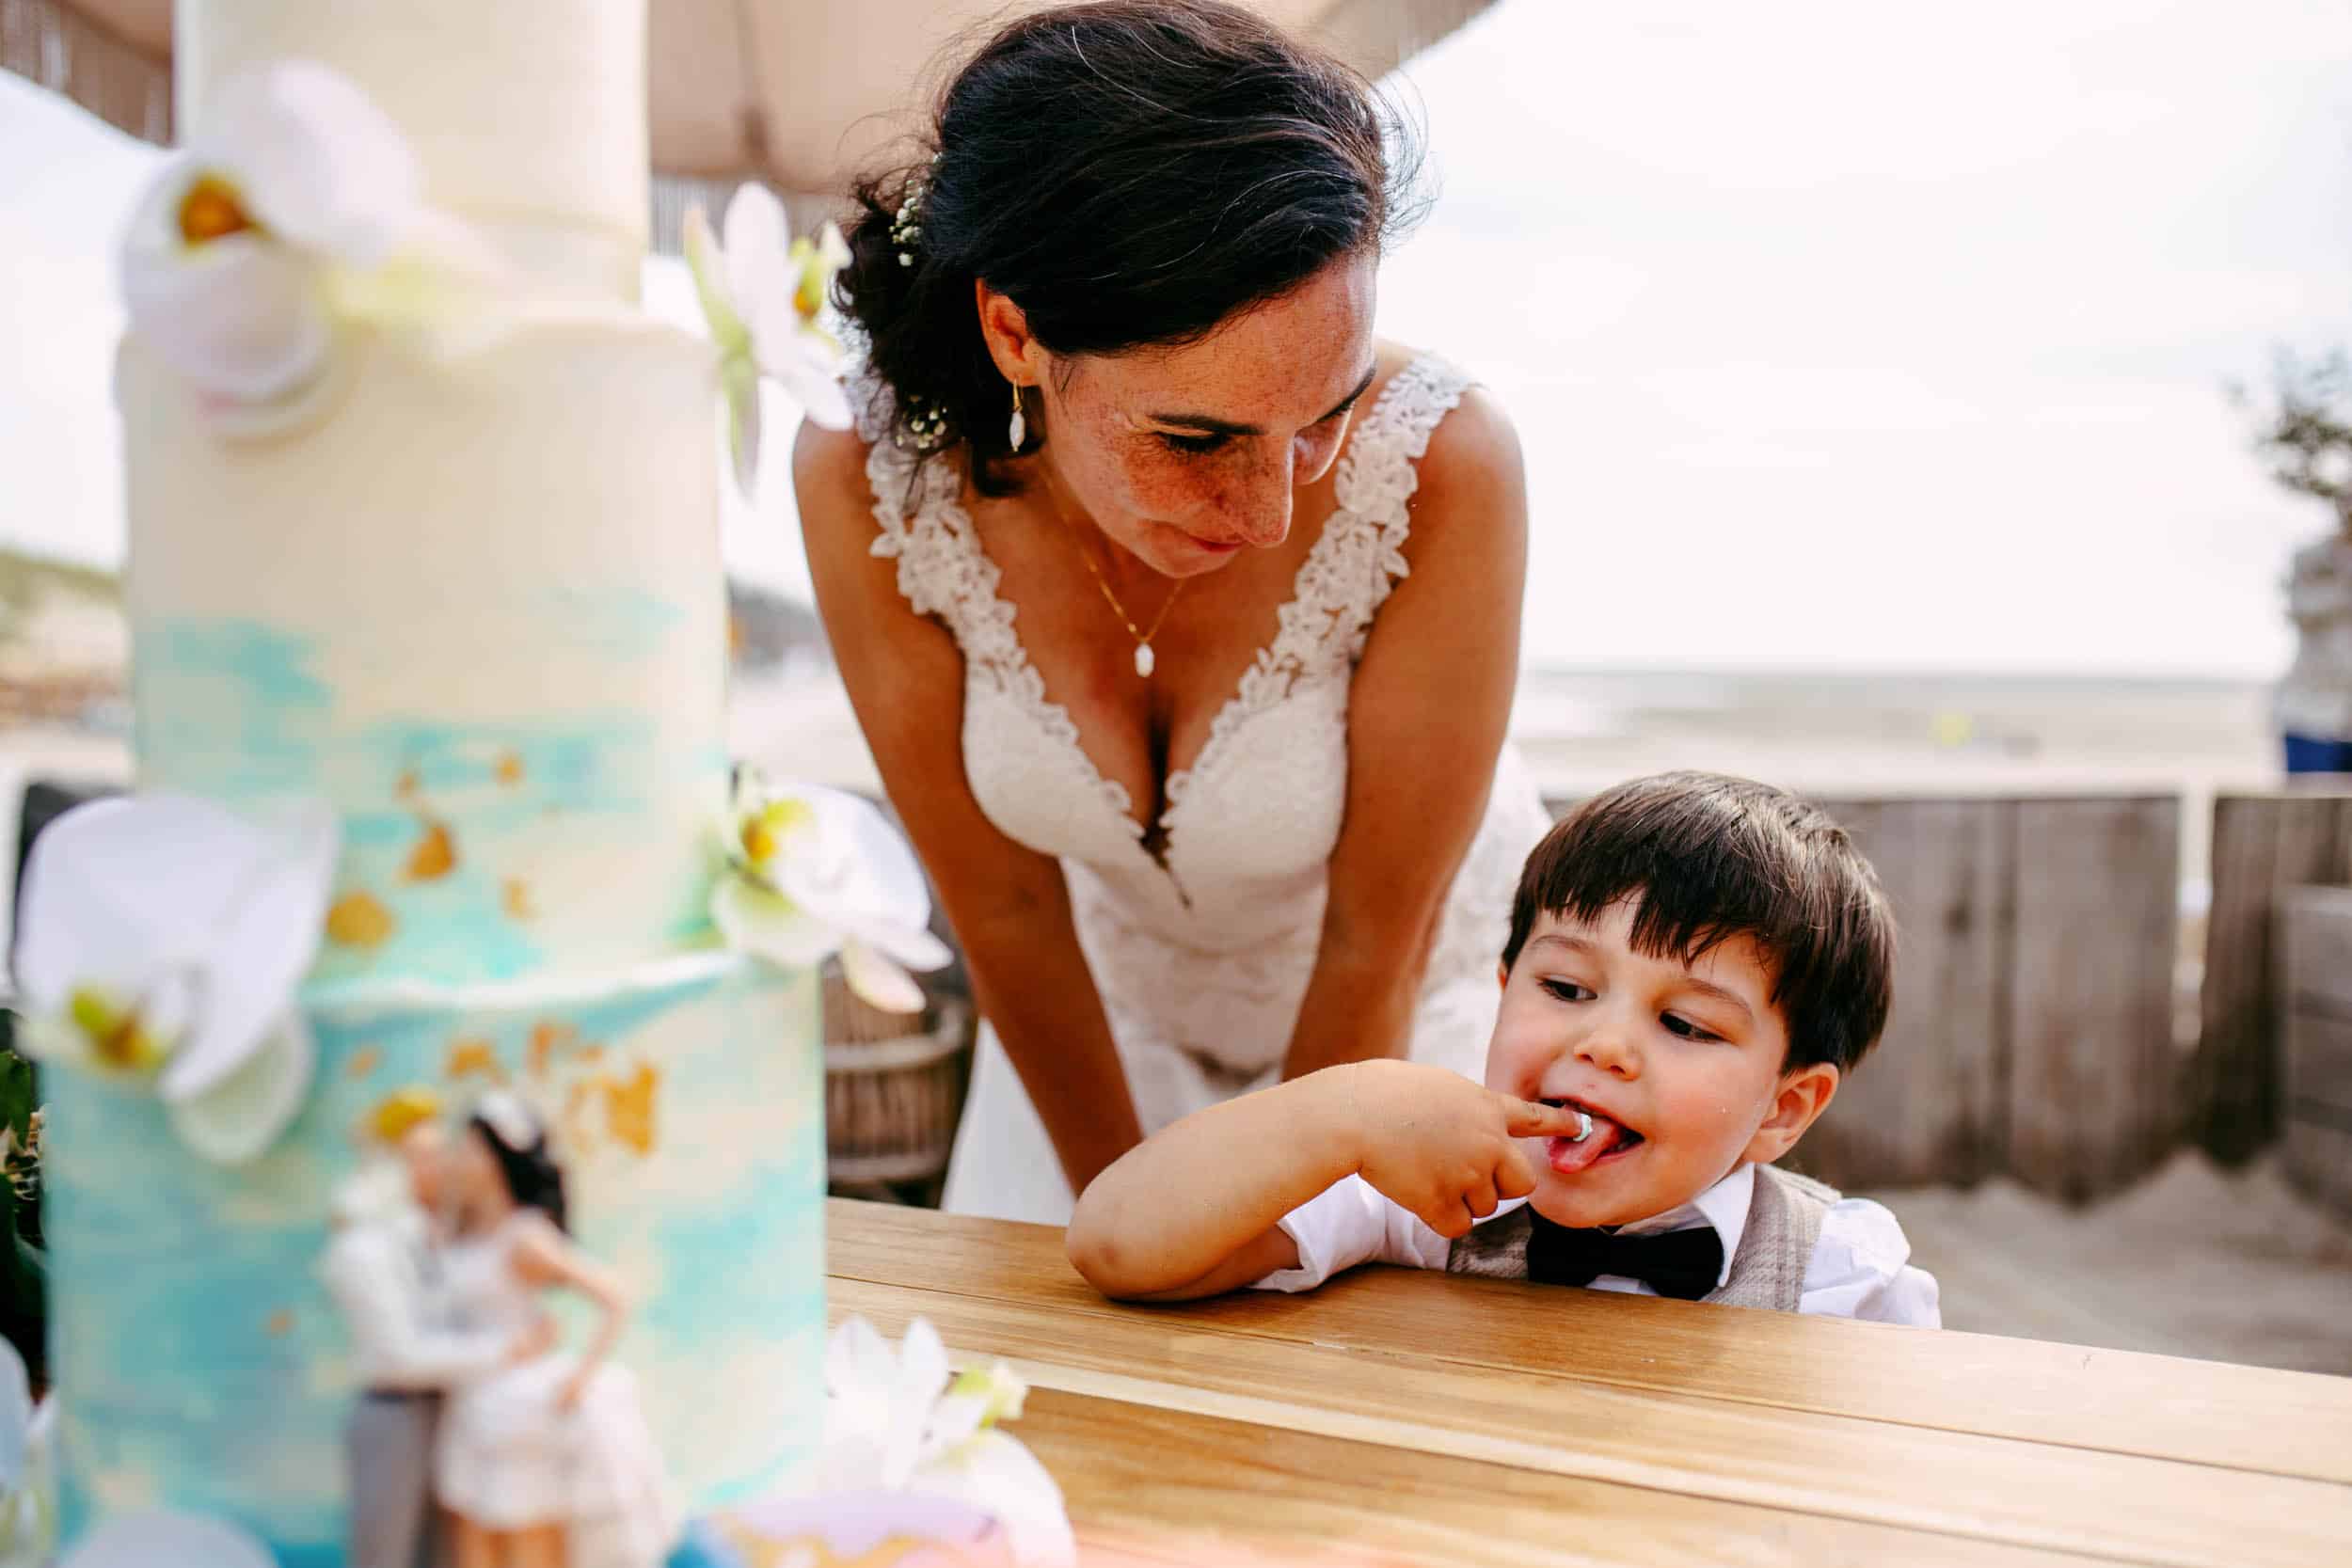 A woman and a little boy look at a cake.